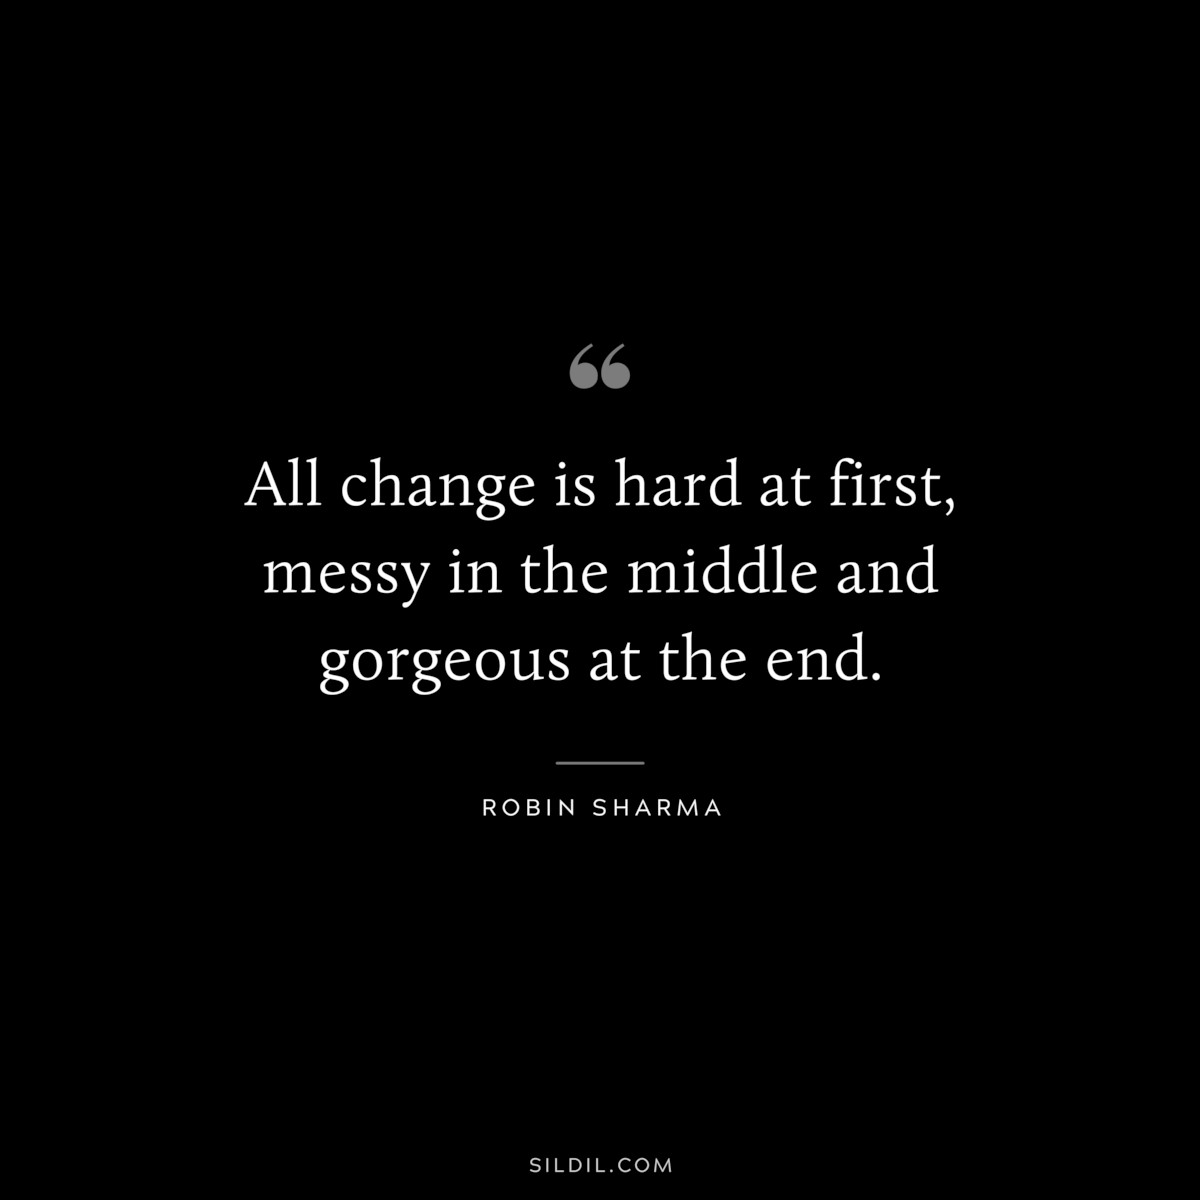 All change is hard at first, messy in the middle and gorgeous at the end. ― Robin Sharma